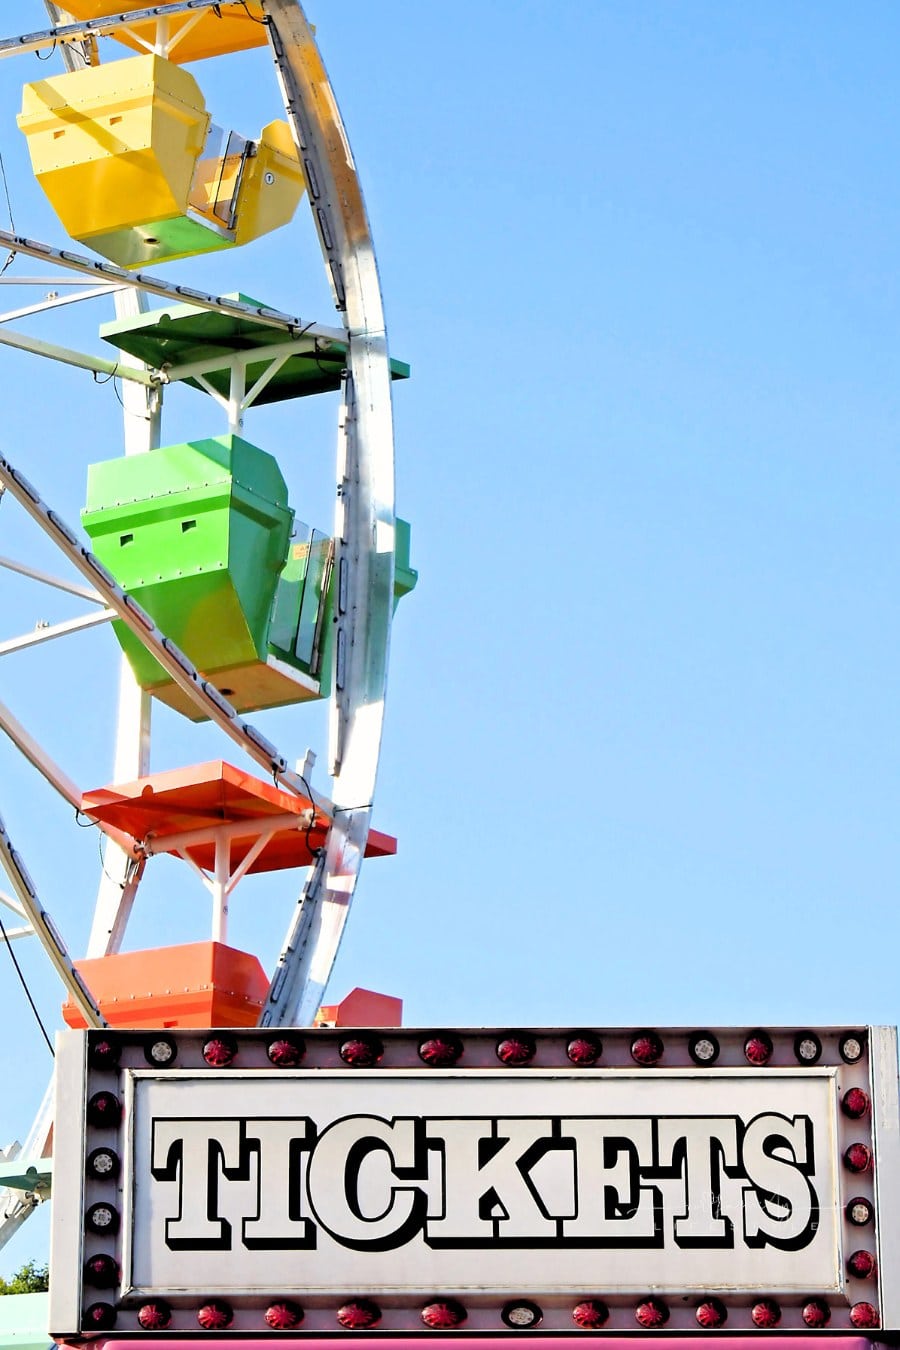 Ticket booth at the fair with colorful Ferris wheel in background